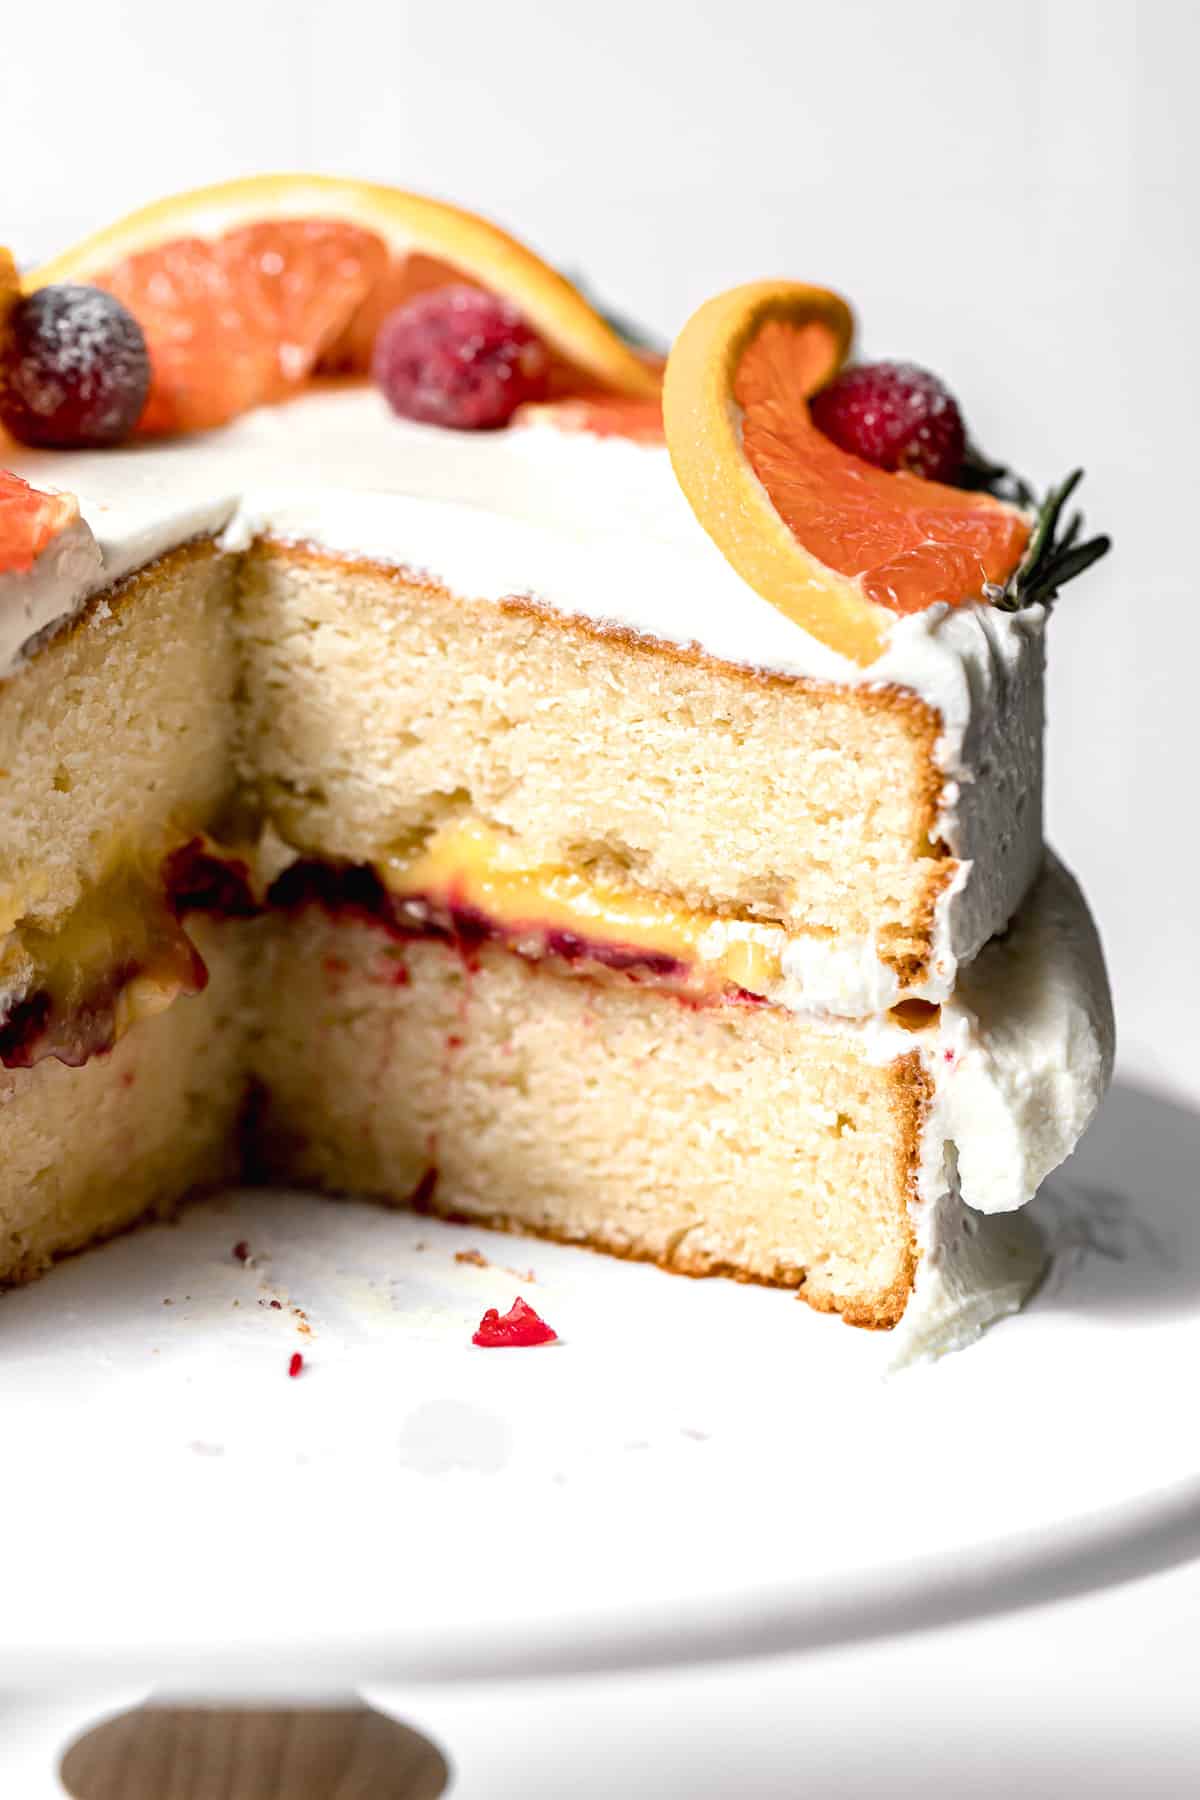 cranberry orange cake on cake stand cut to reveal inside texture.